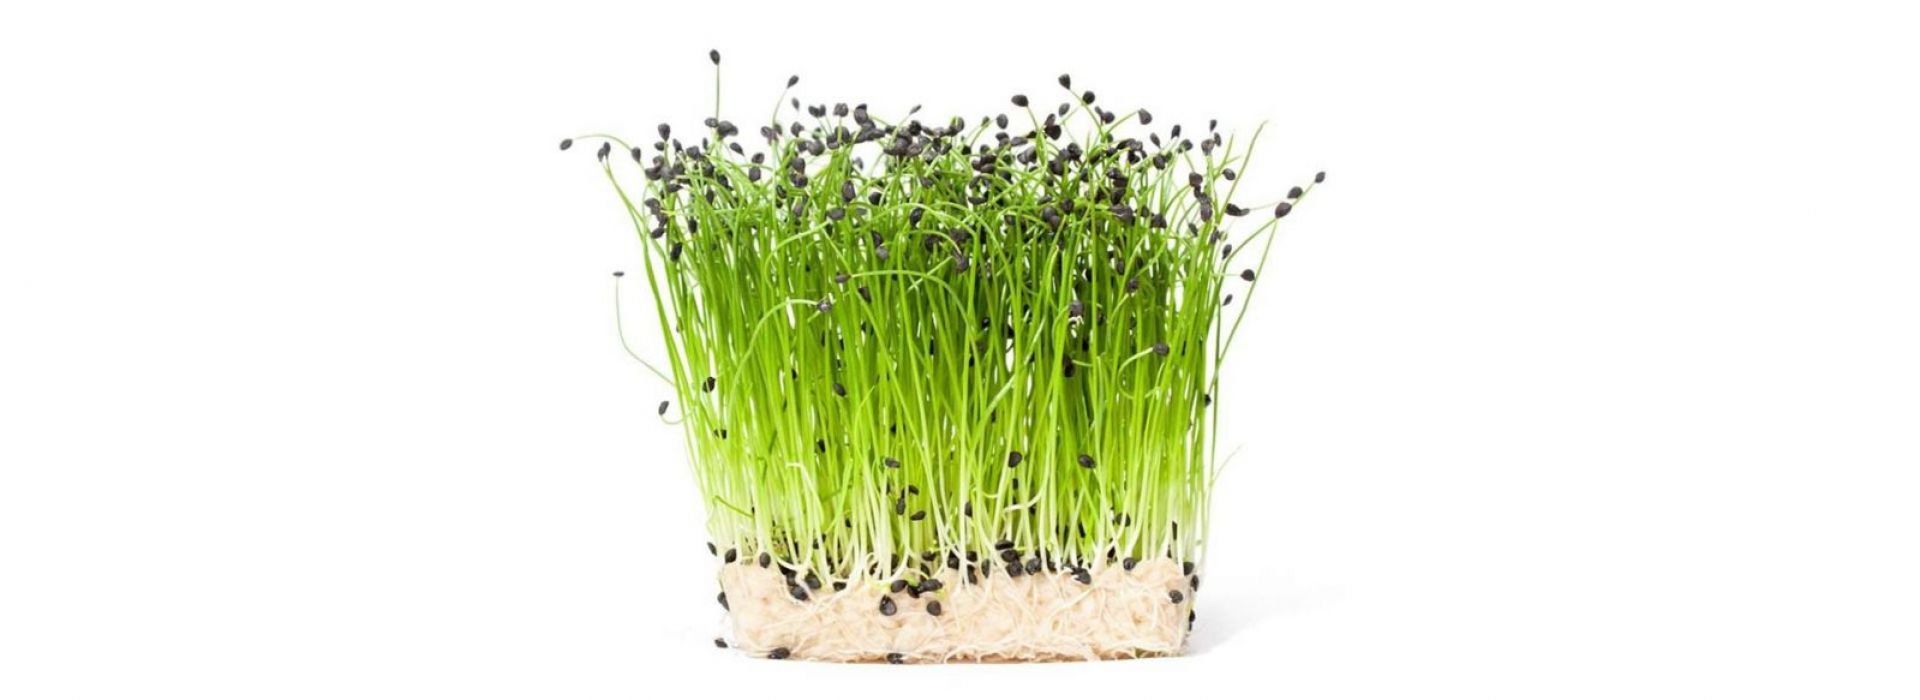 Rock Chives Cress